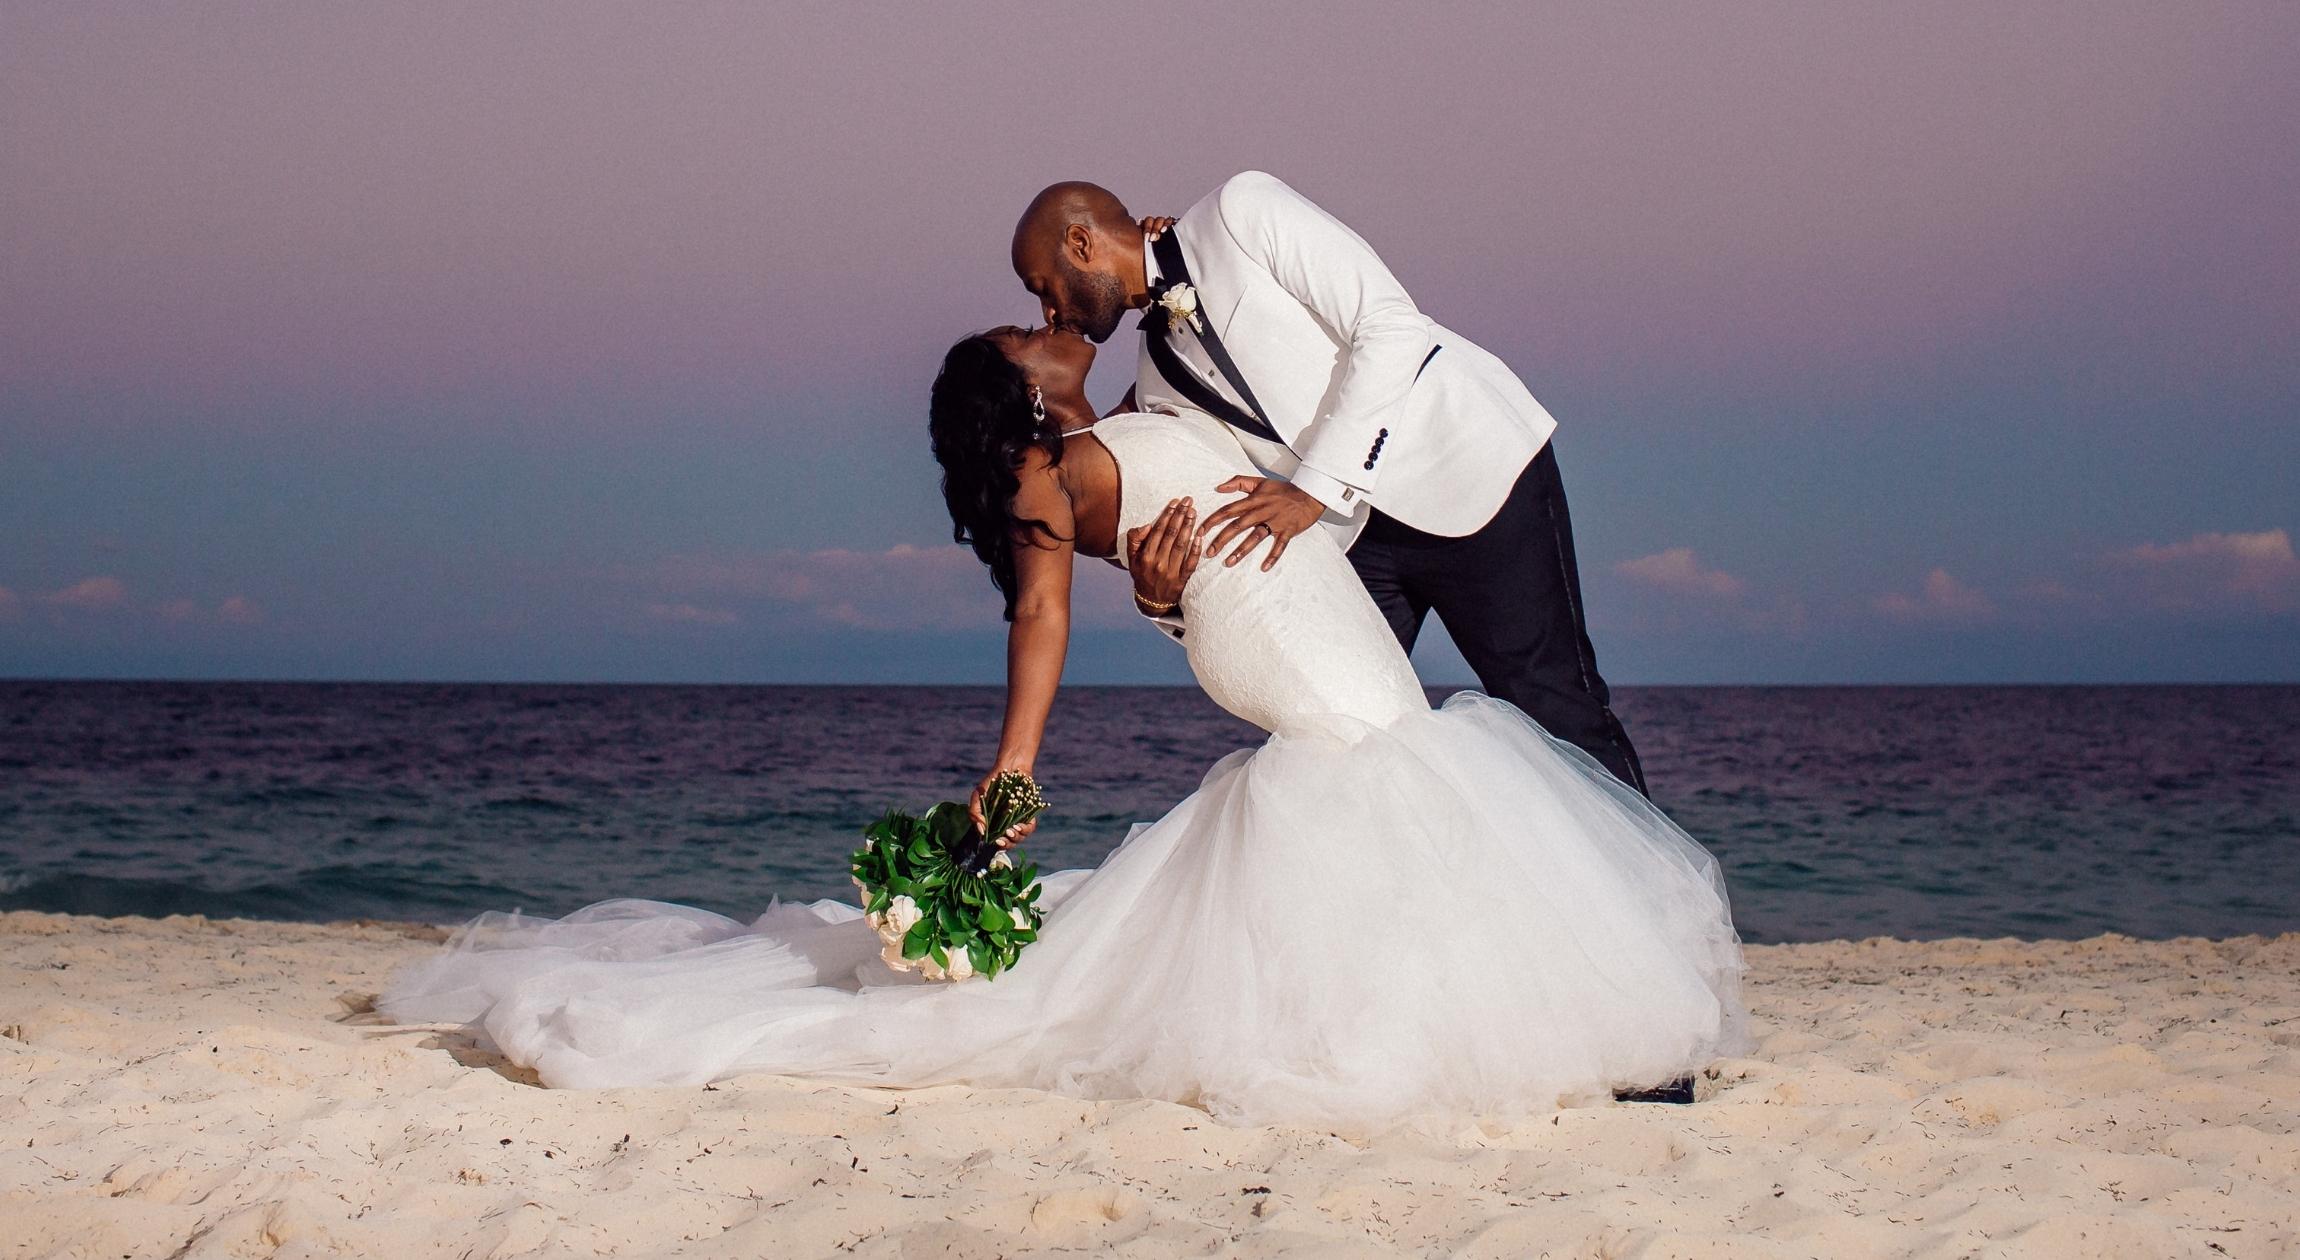 A Black couple in wedding attire kissing on the beach